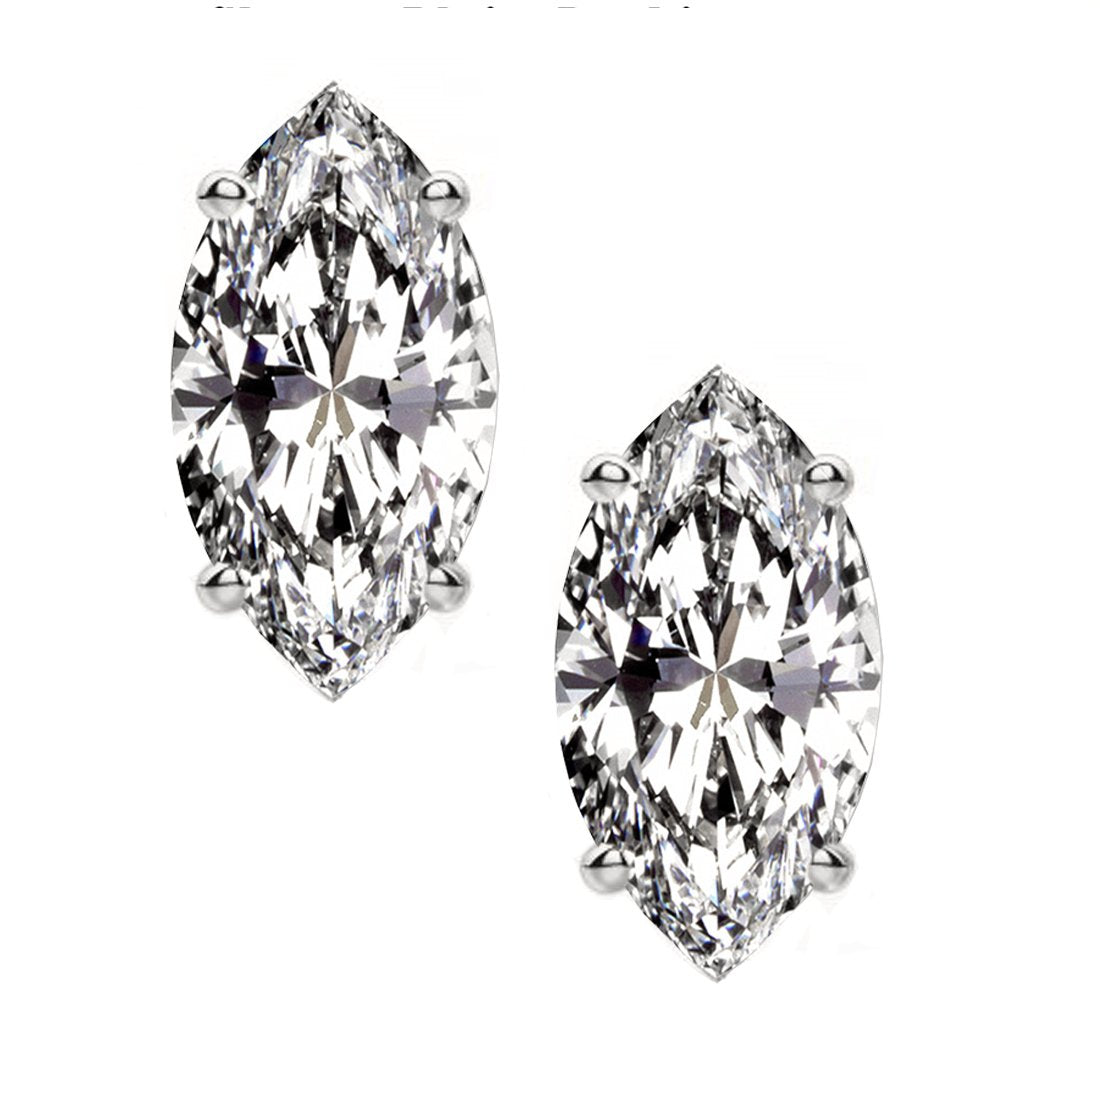 PLATINUM 950 MARQUISE. Choose From 0.25 CTW To 10.00 CTW